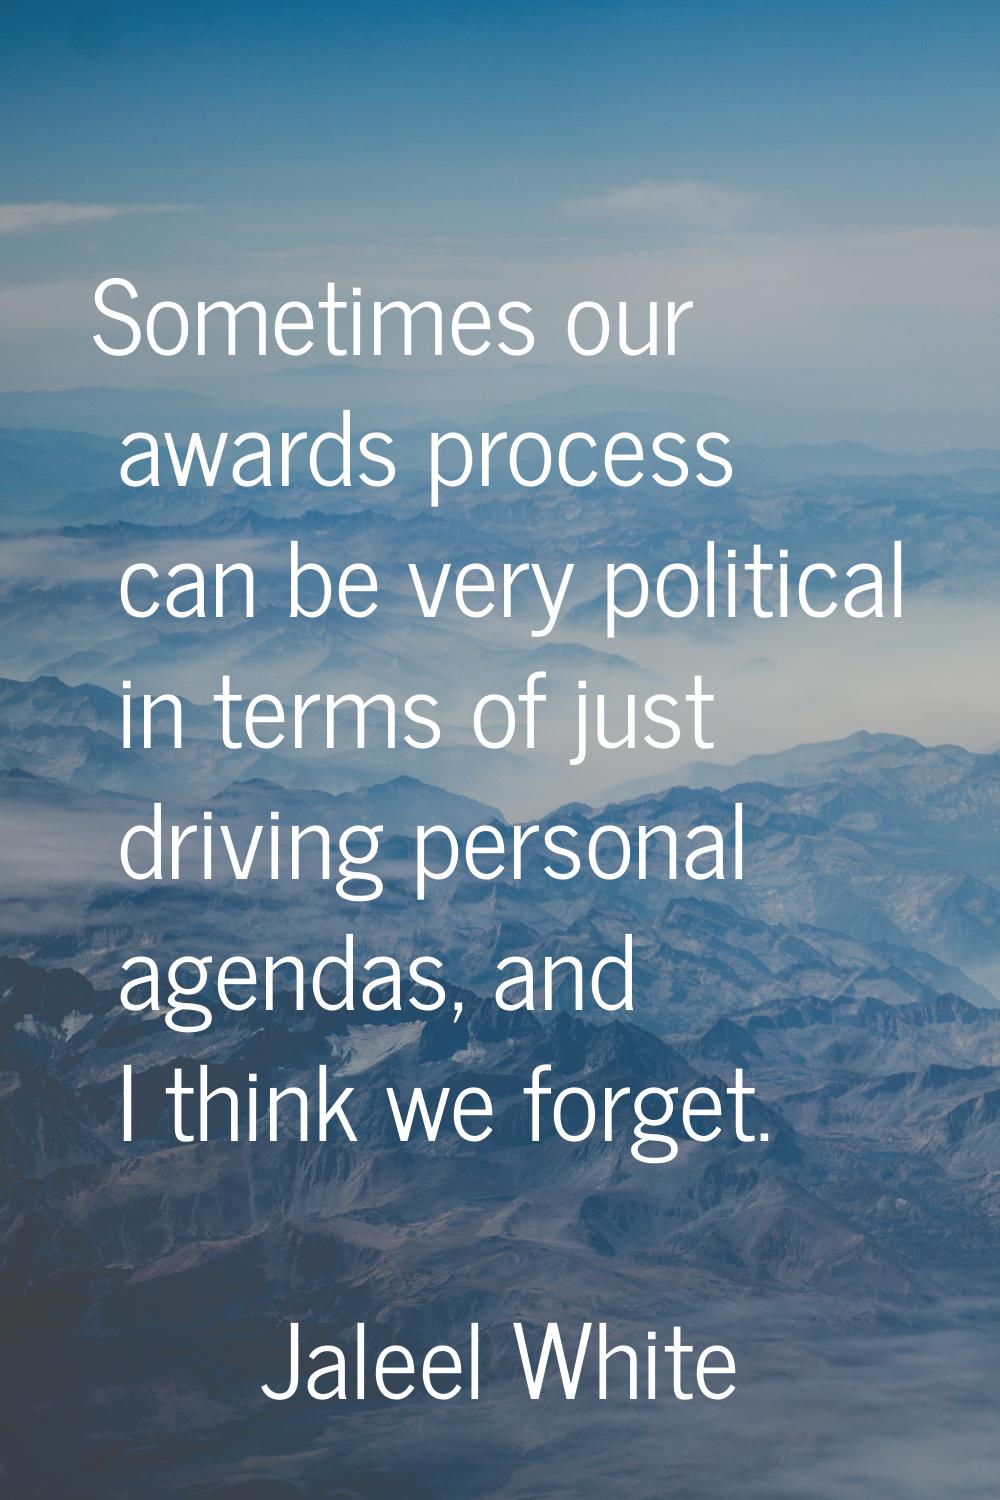 Sometimes our awards process can be very political in terms of just driving personal agendas, and I